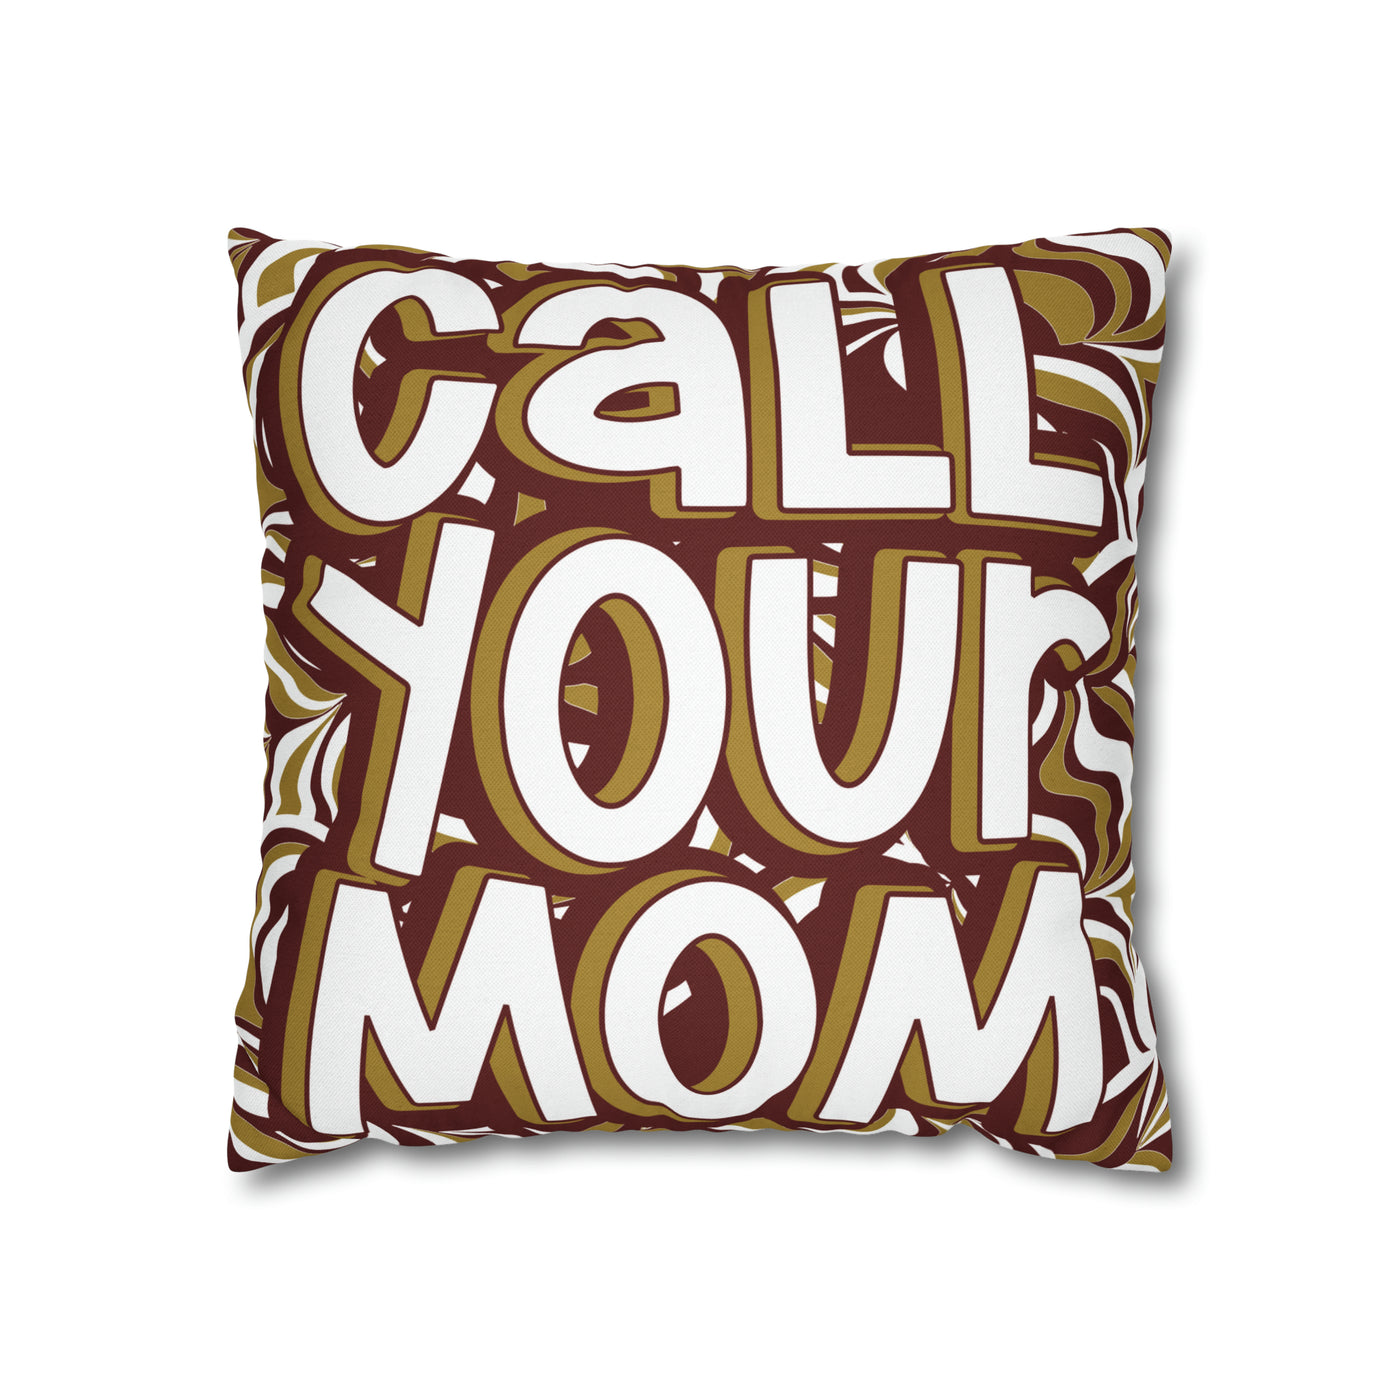 Call Your Mom Make Good Choices - College of Charleston